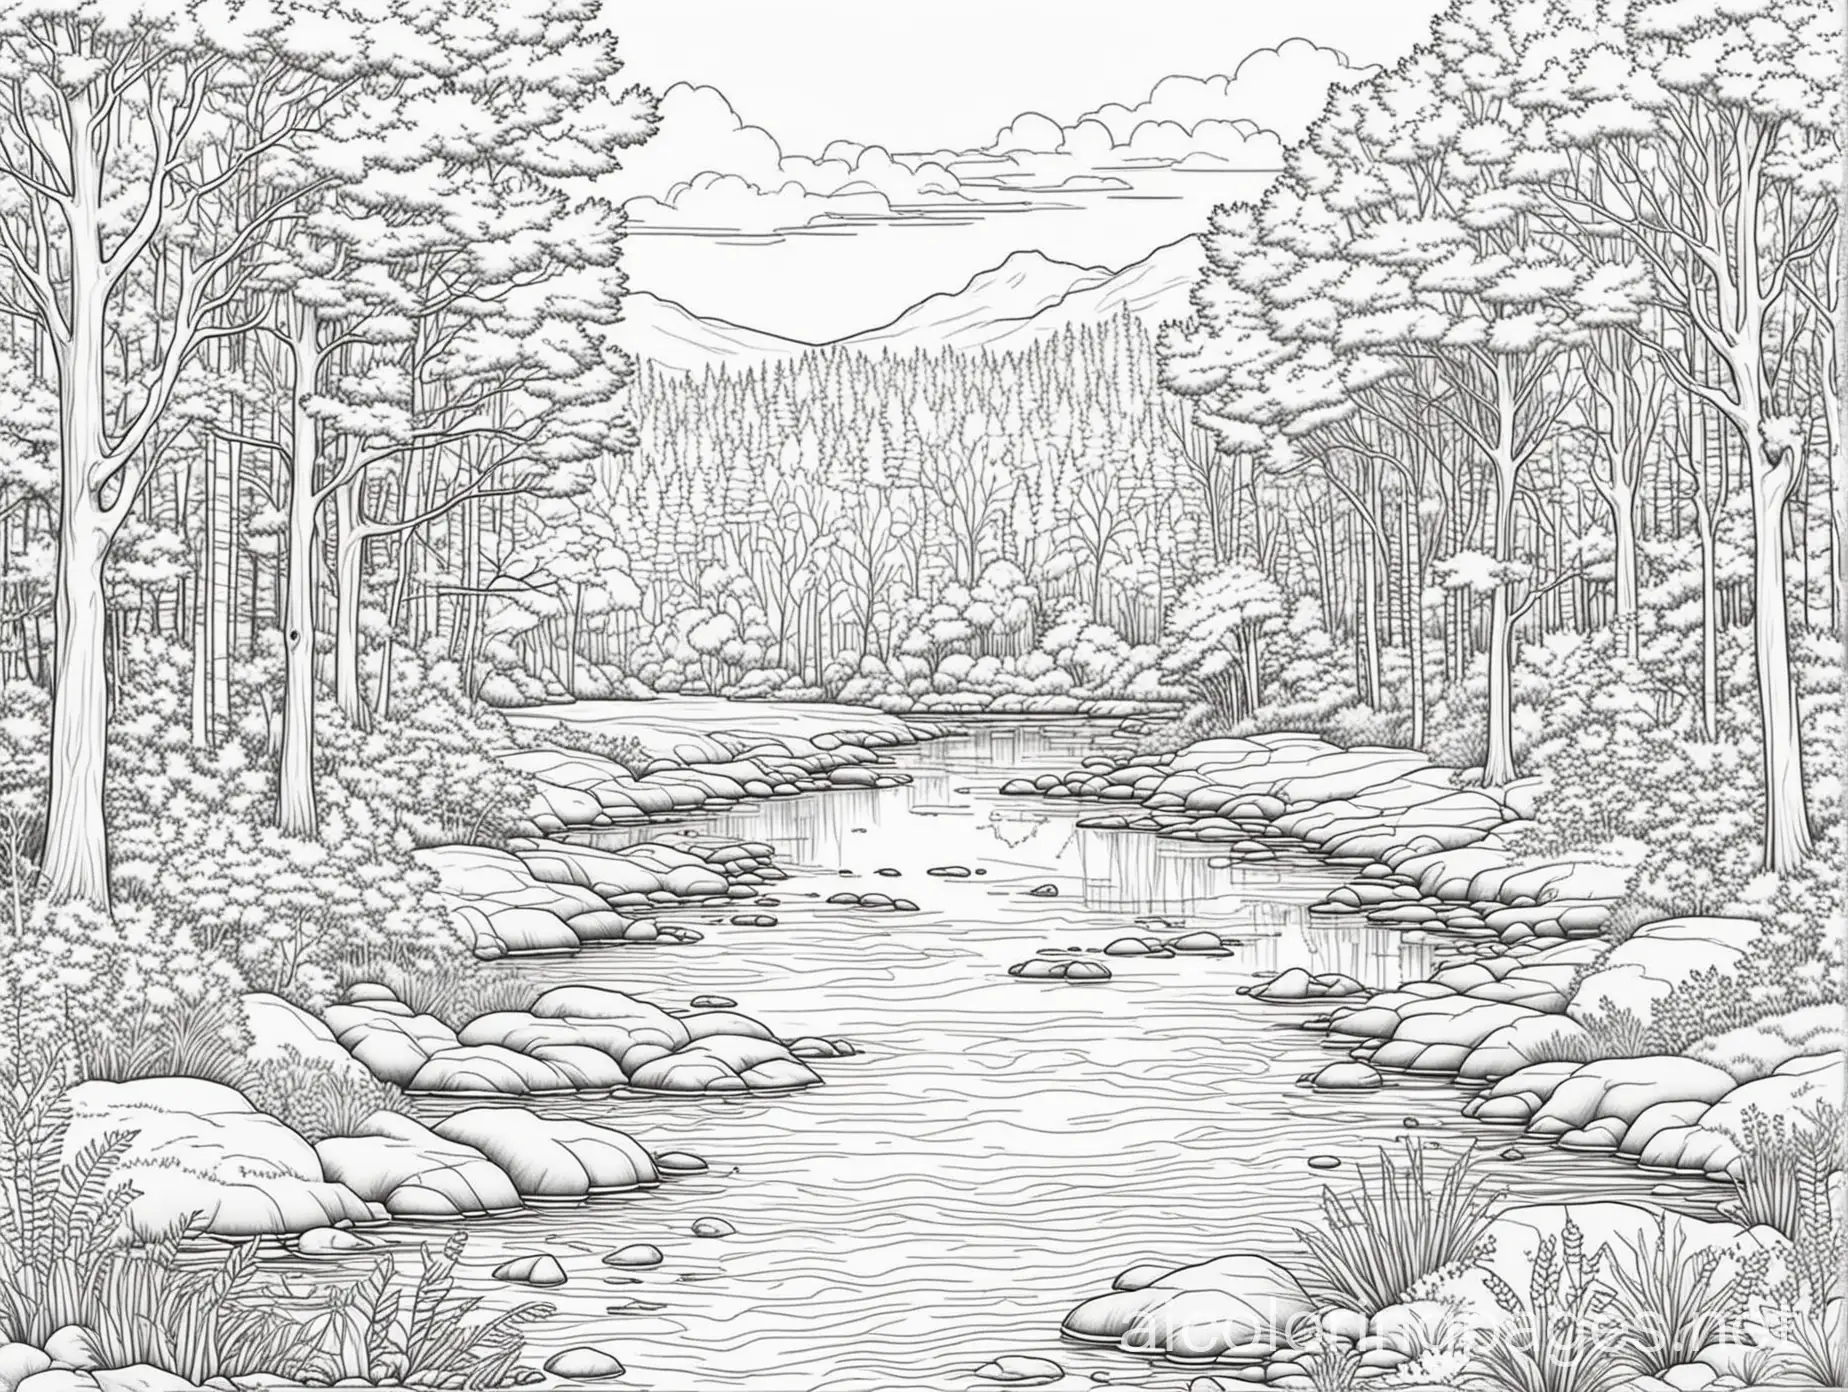 river scape with trees and fauna , Coloring Page, black and white, line art, white background, Simplicity, Ample White Space. The background of the coloring page is plain white to make it easy for young children to color within the lines. The outlines of all the subjects are easy to distinguish, making it simple for kids to color without too much difficulty